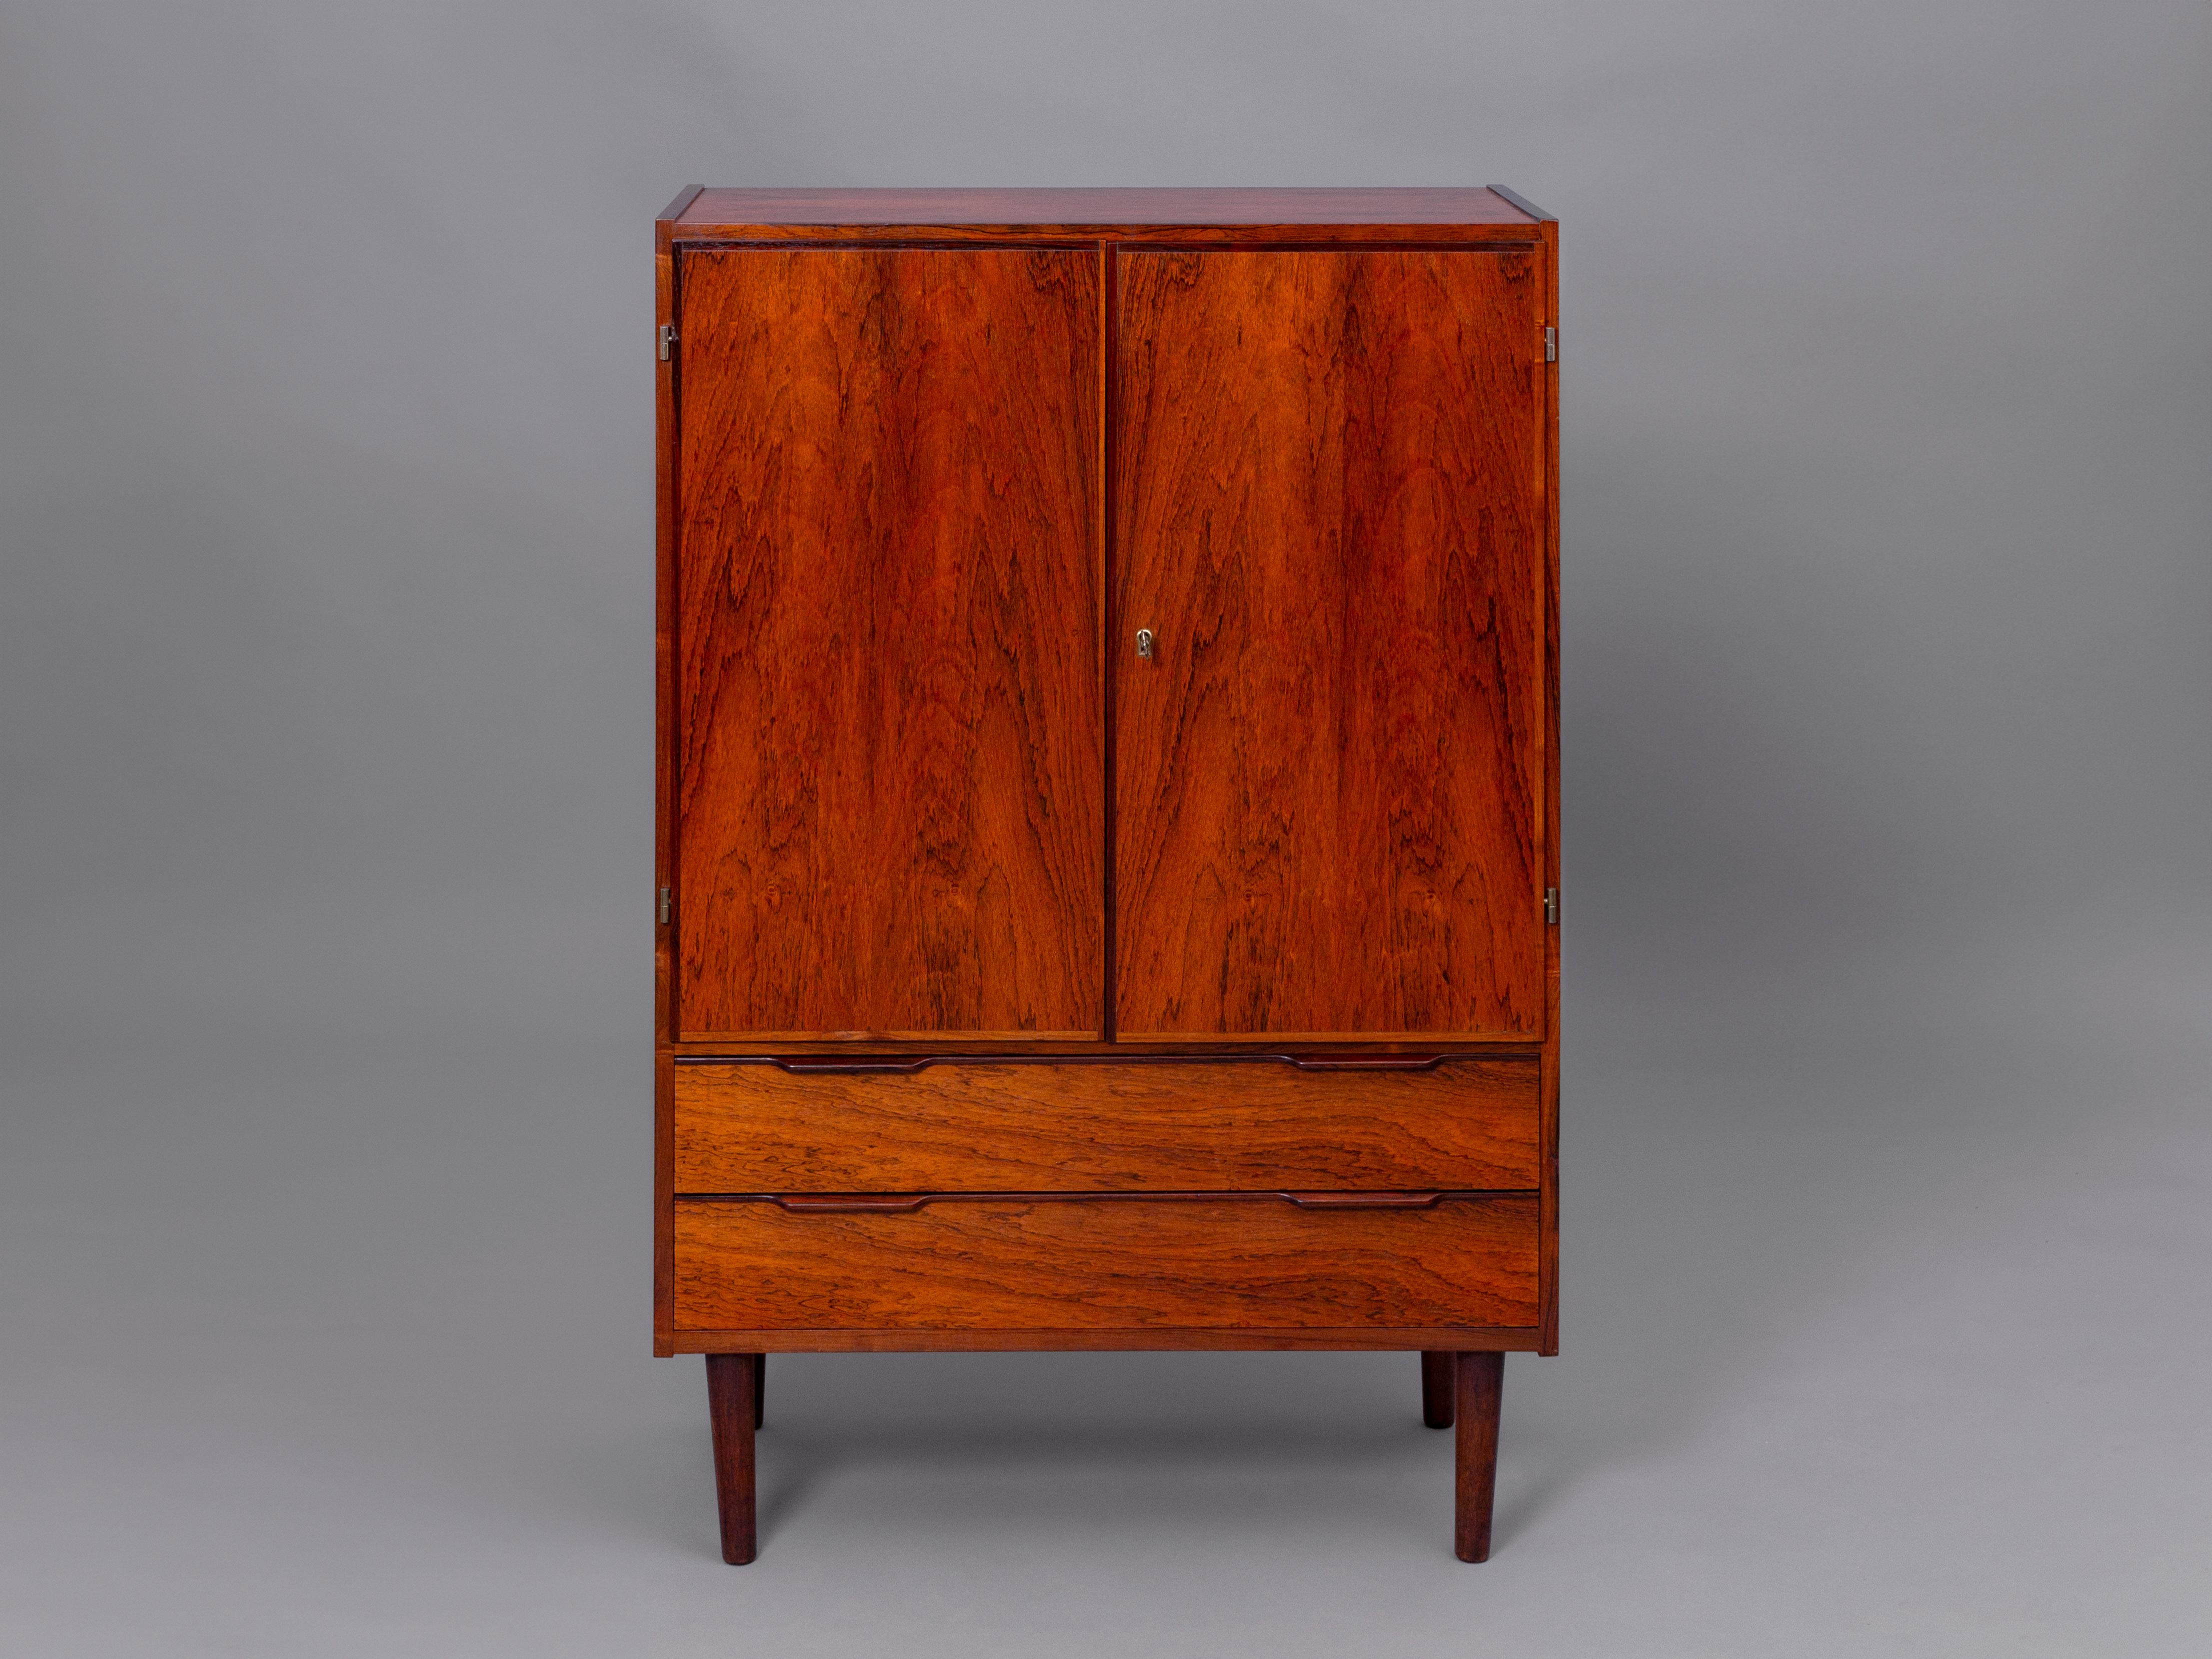 Small cabinet by anonymous designer, probably Erling Torvits. Manufactured in Rosewood. Denmark, 1960s

This piece fits perfectly for reduced spaces due to its rare proportions. The design follows the mid century rules of simplicity and the use of